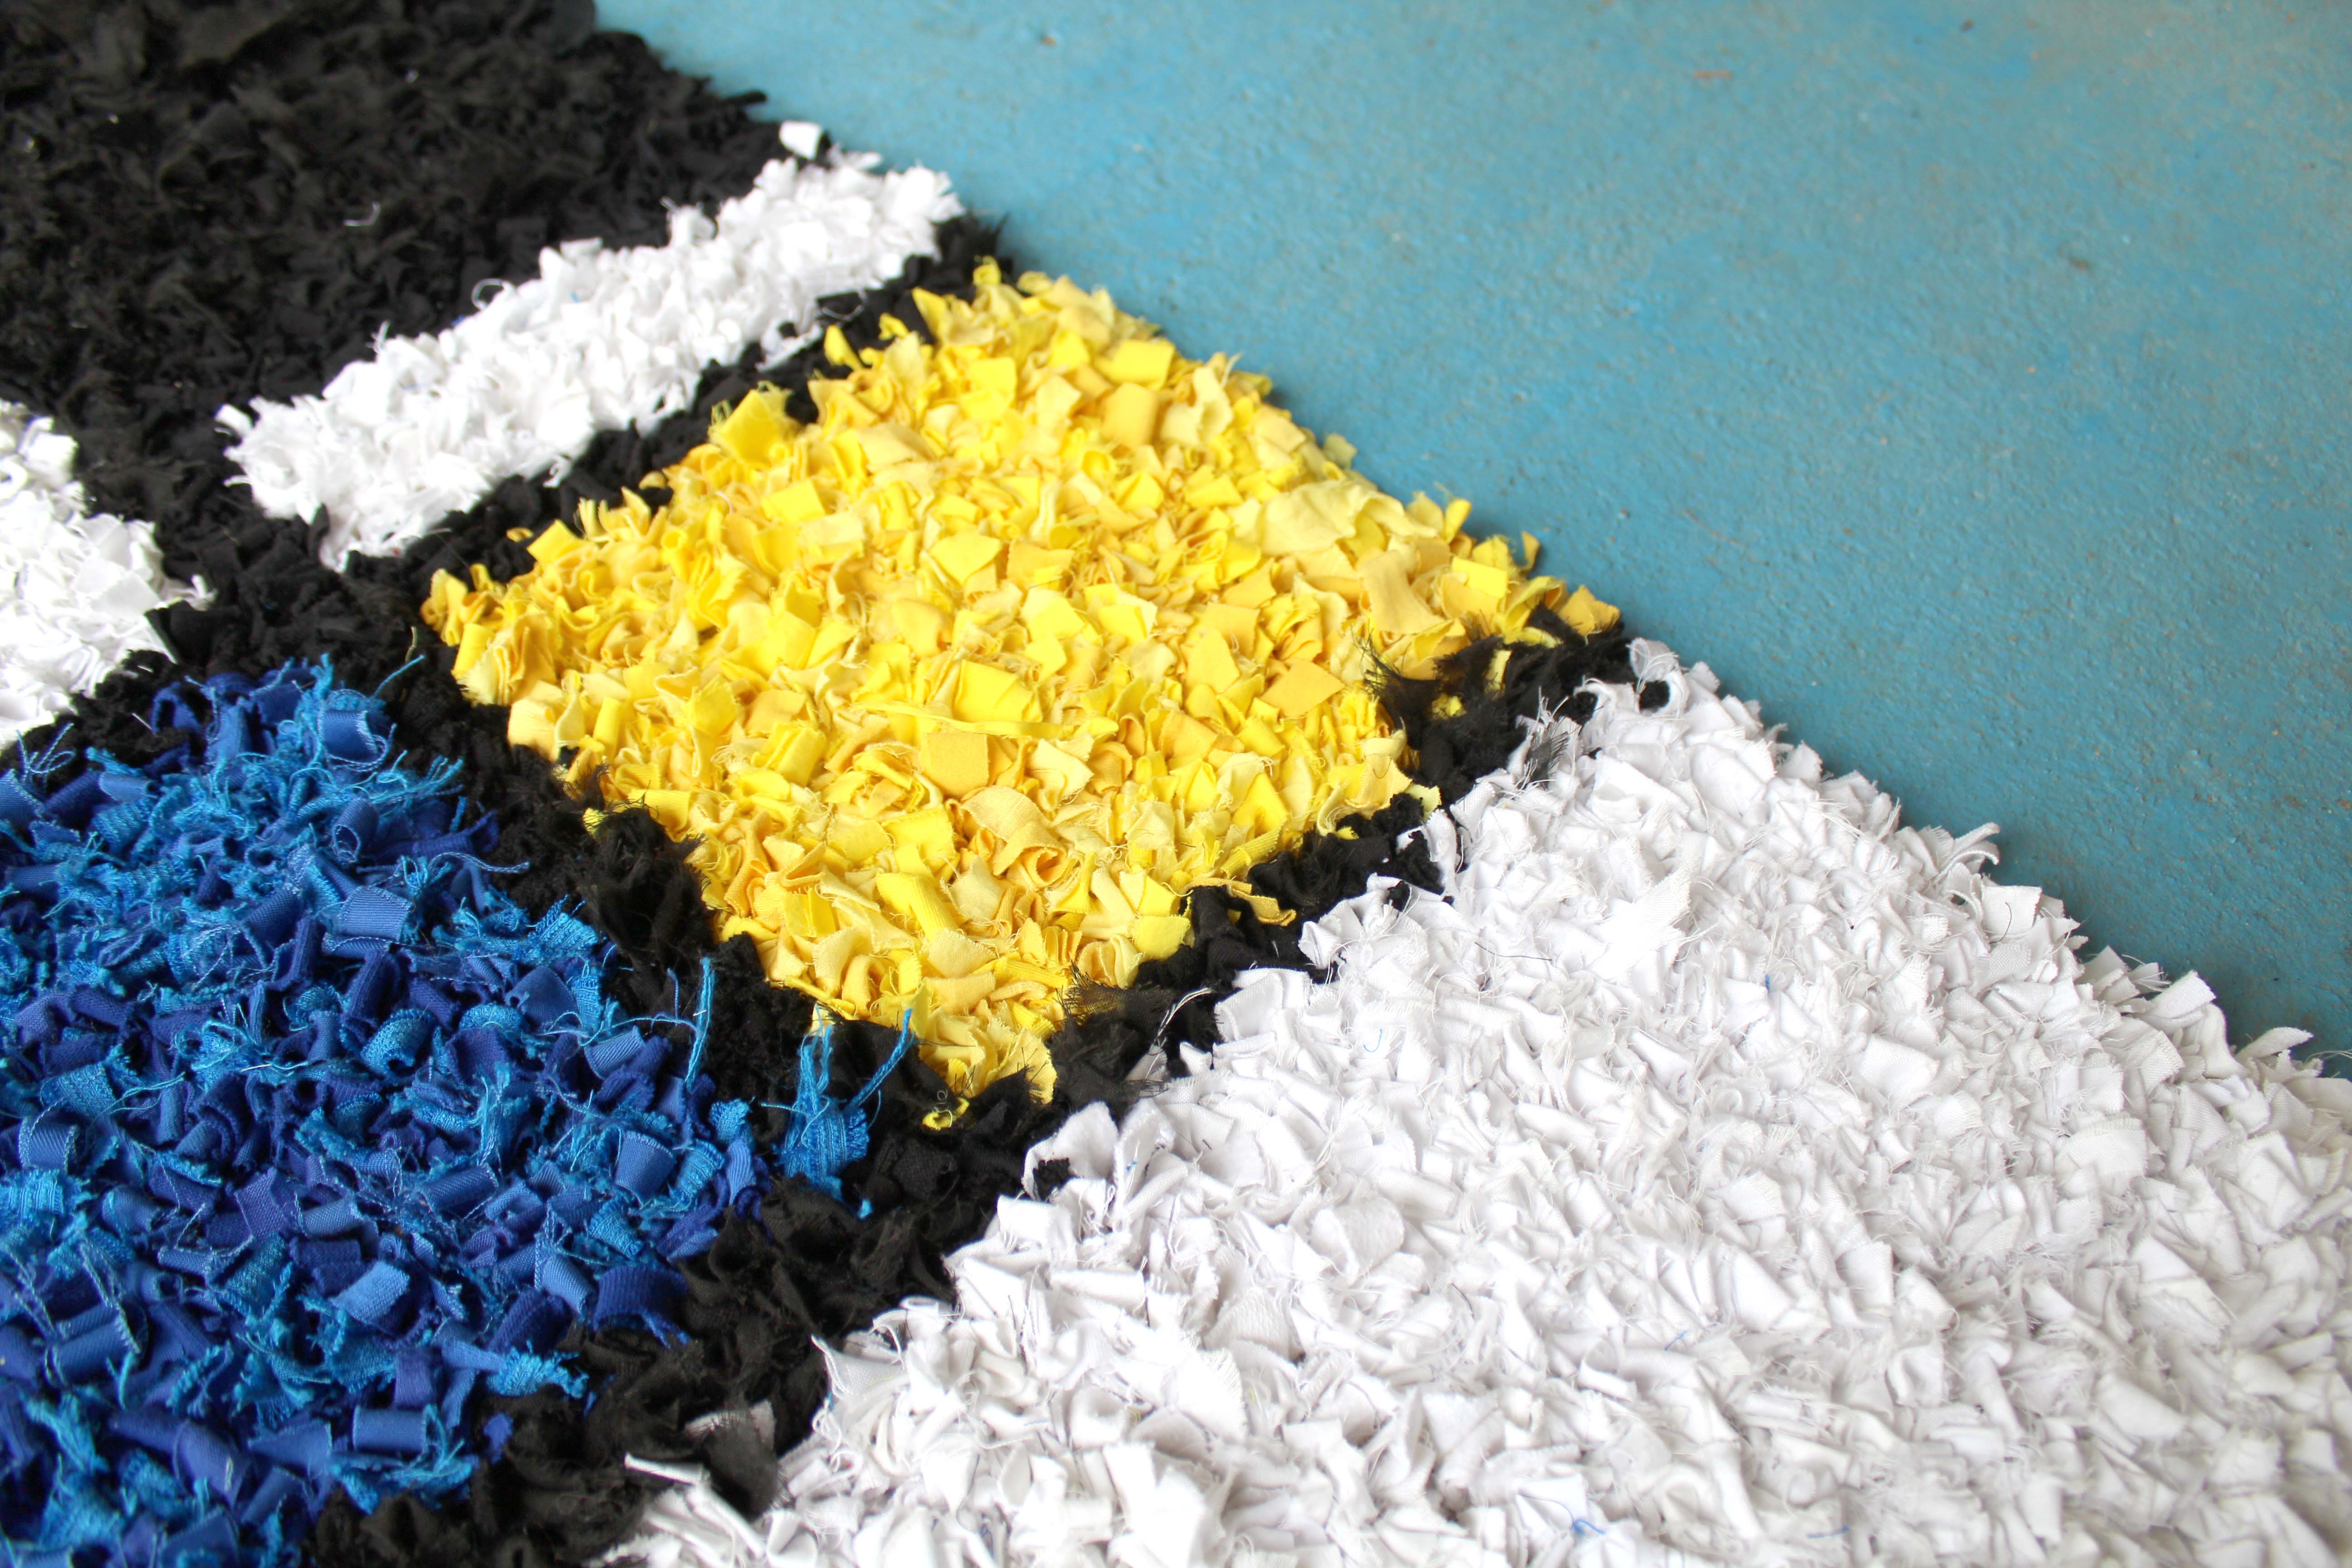 Mondrian Inspired Rag Rug Yellow, Blue and White short shaggy rag rugging up close detail